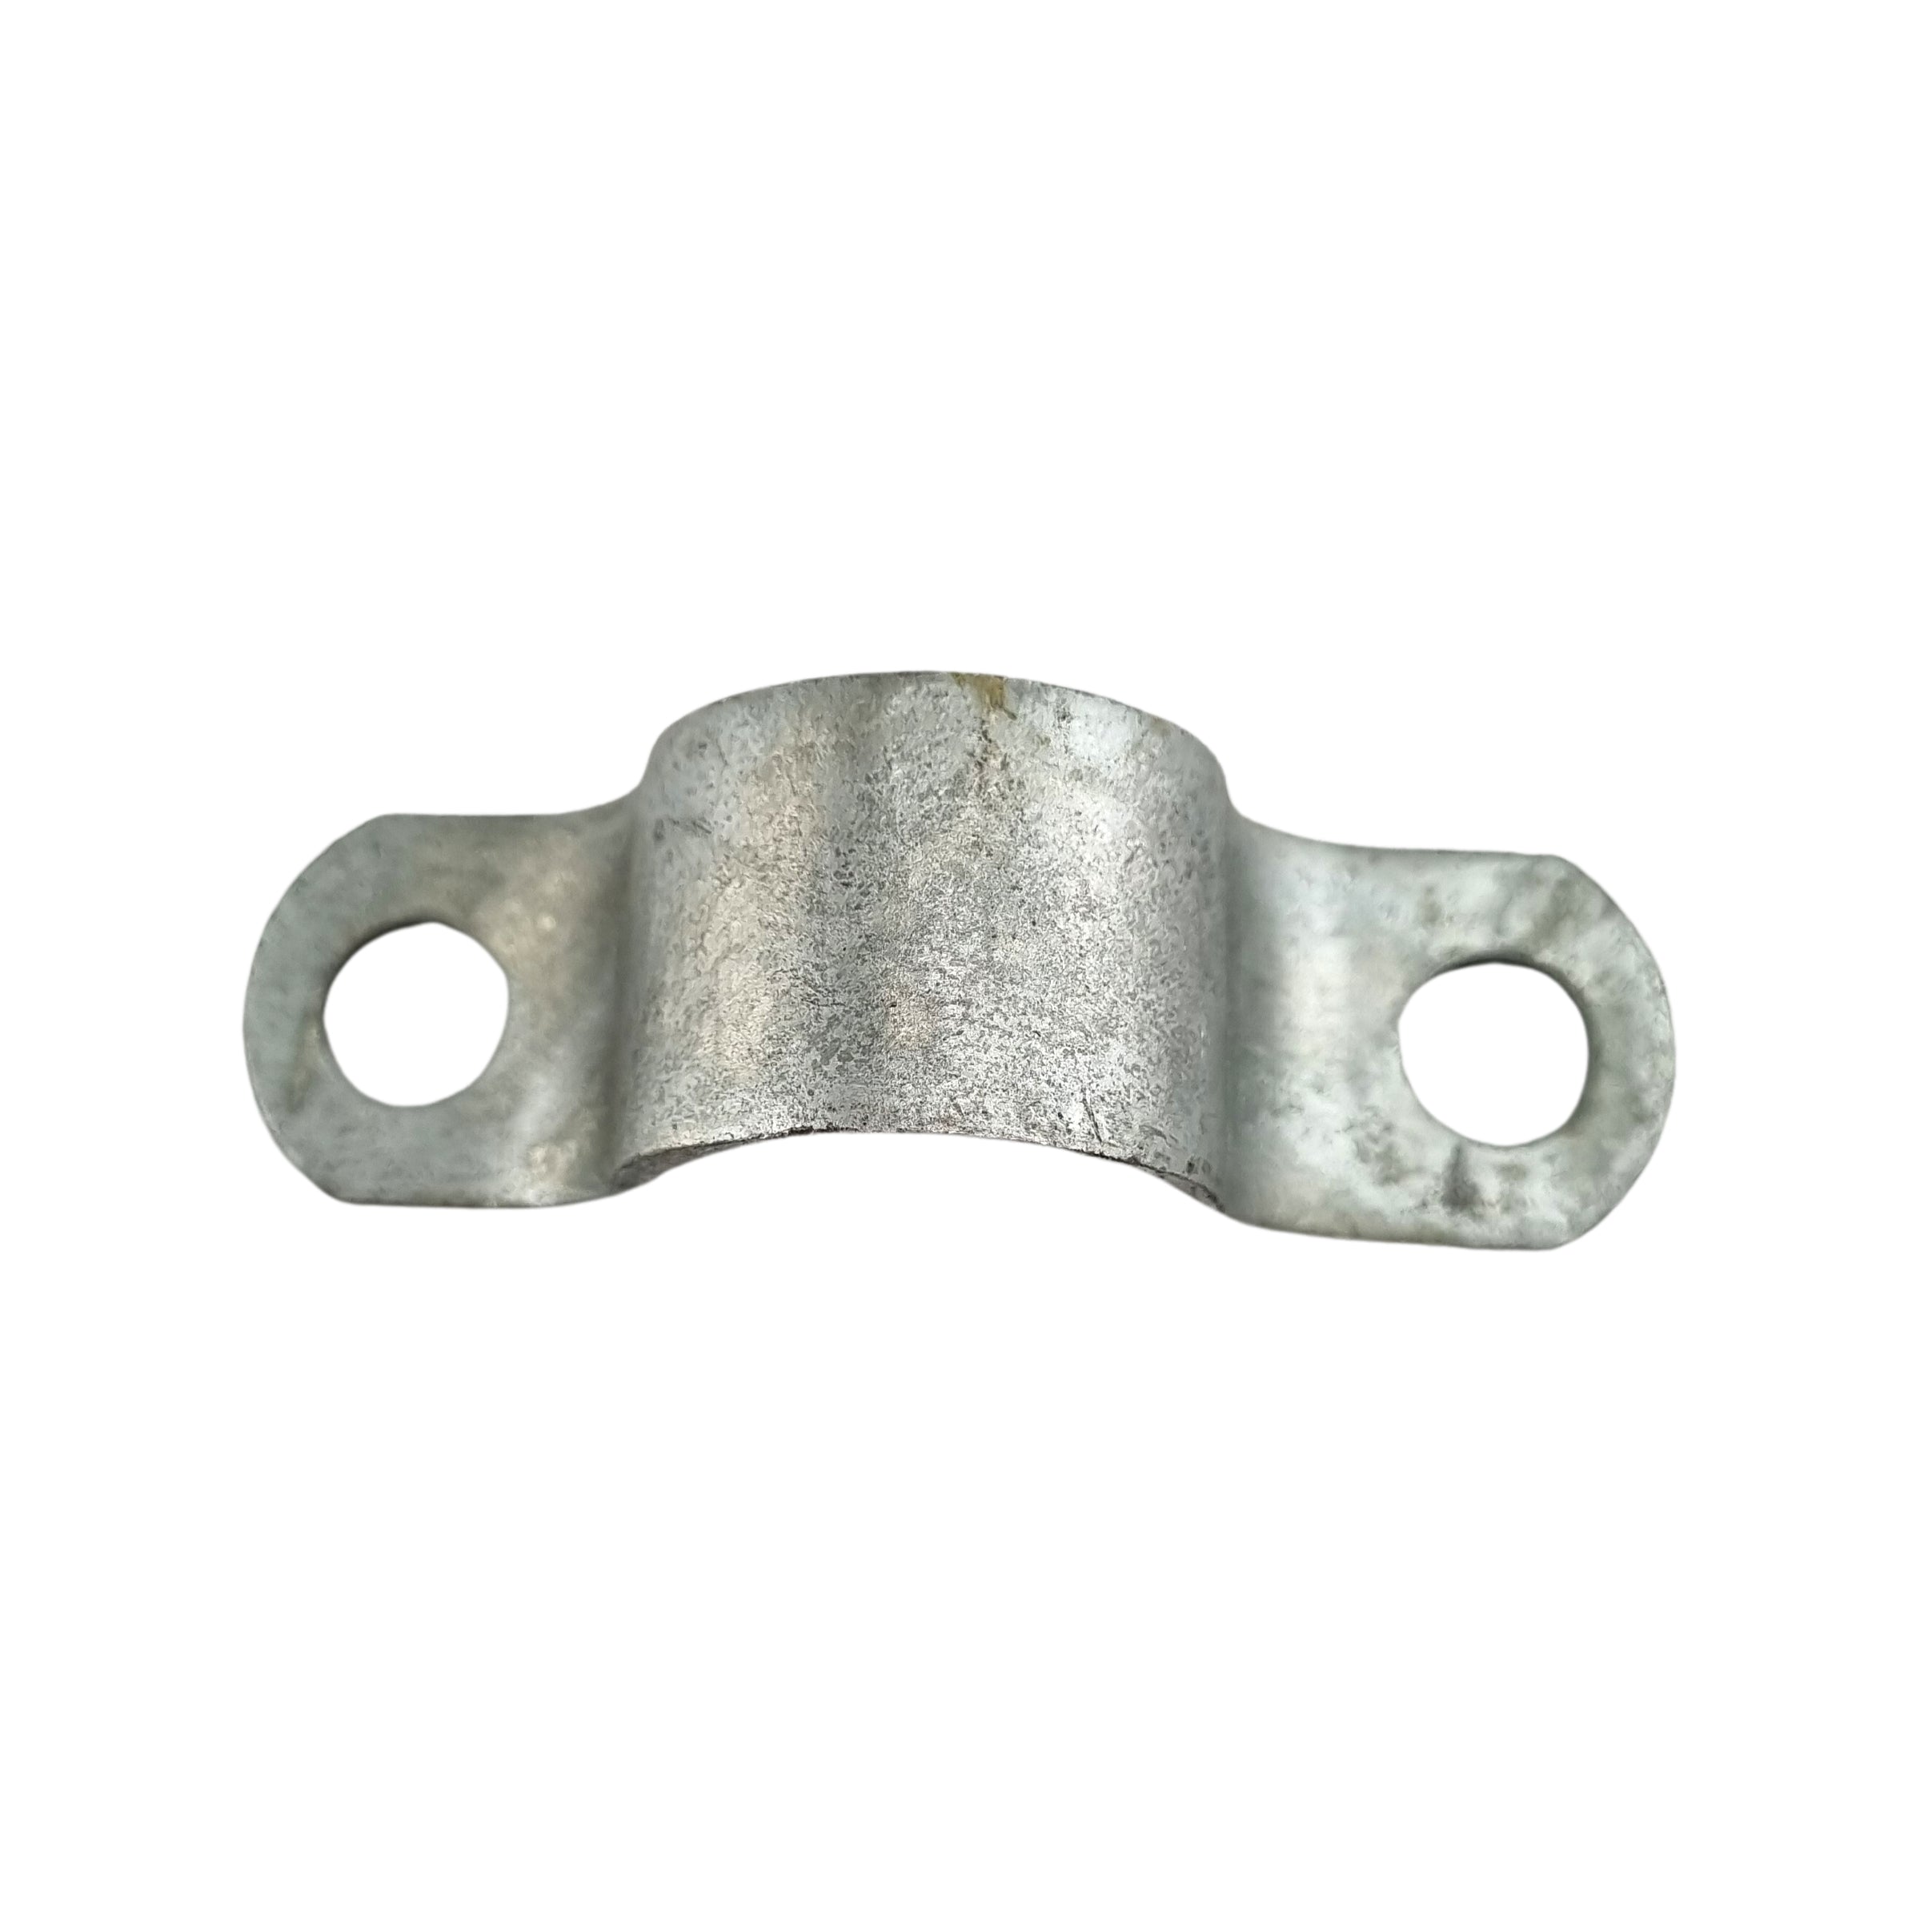 Pipe Strap - Tight Fit - Galvanised. Australian Made. Shop fence & gate fittings online. Australia wide shipping.